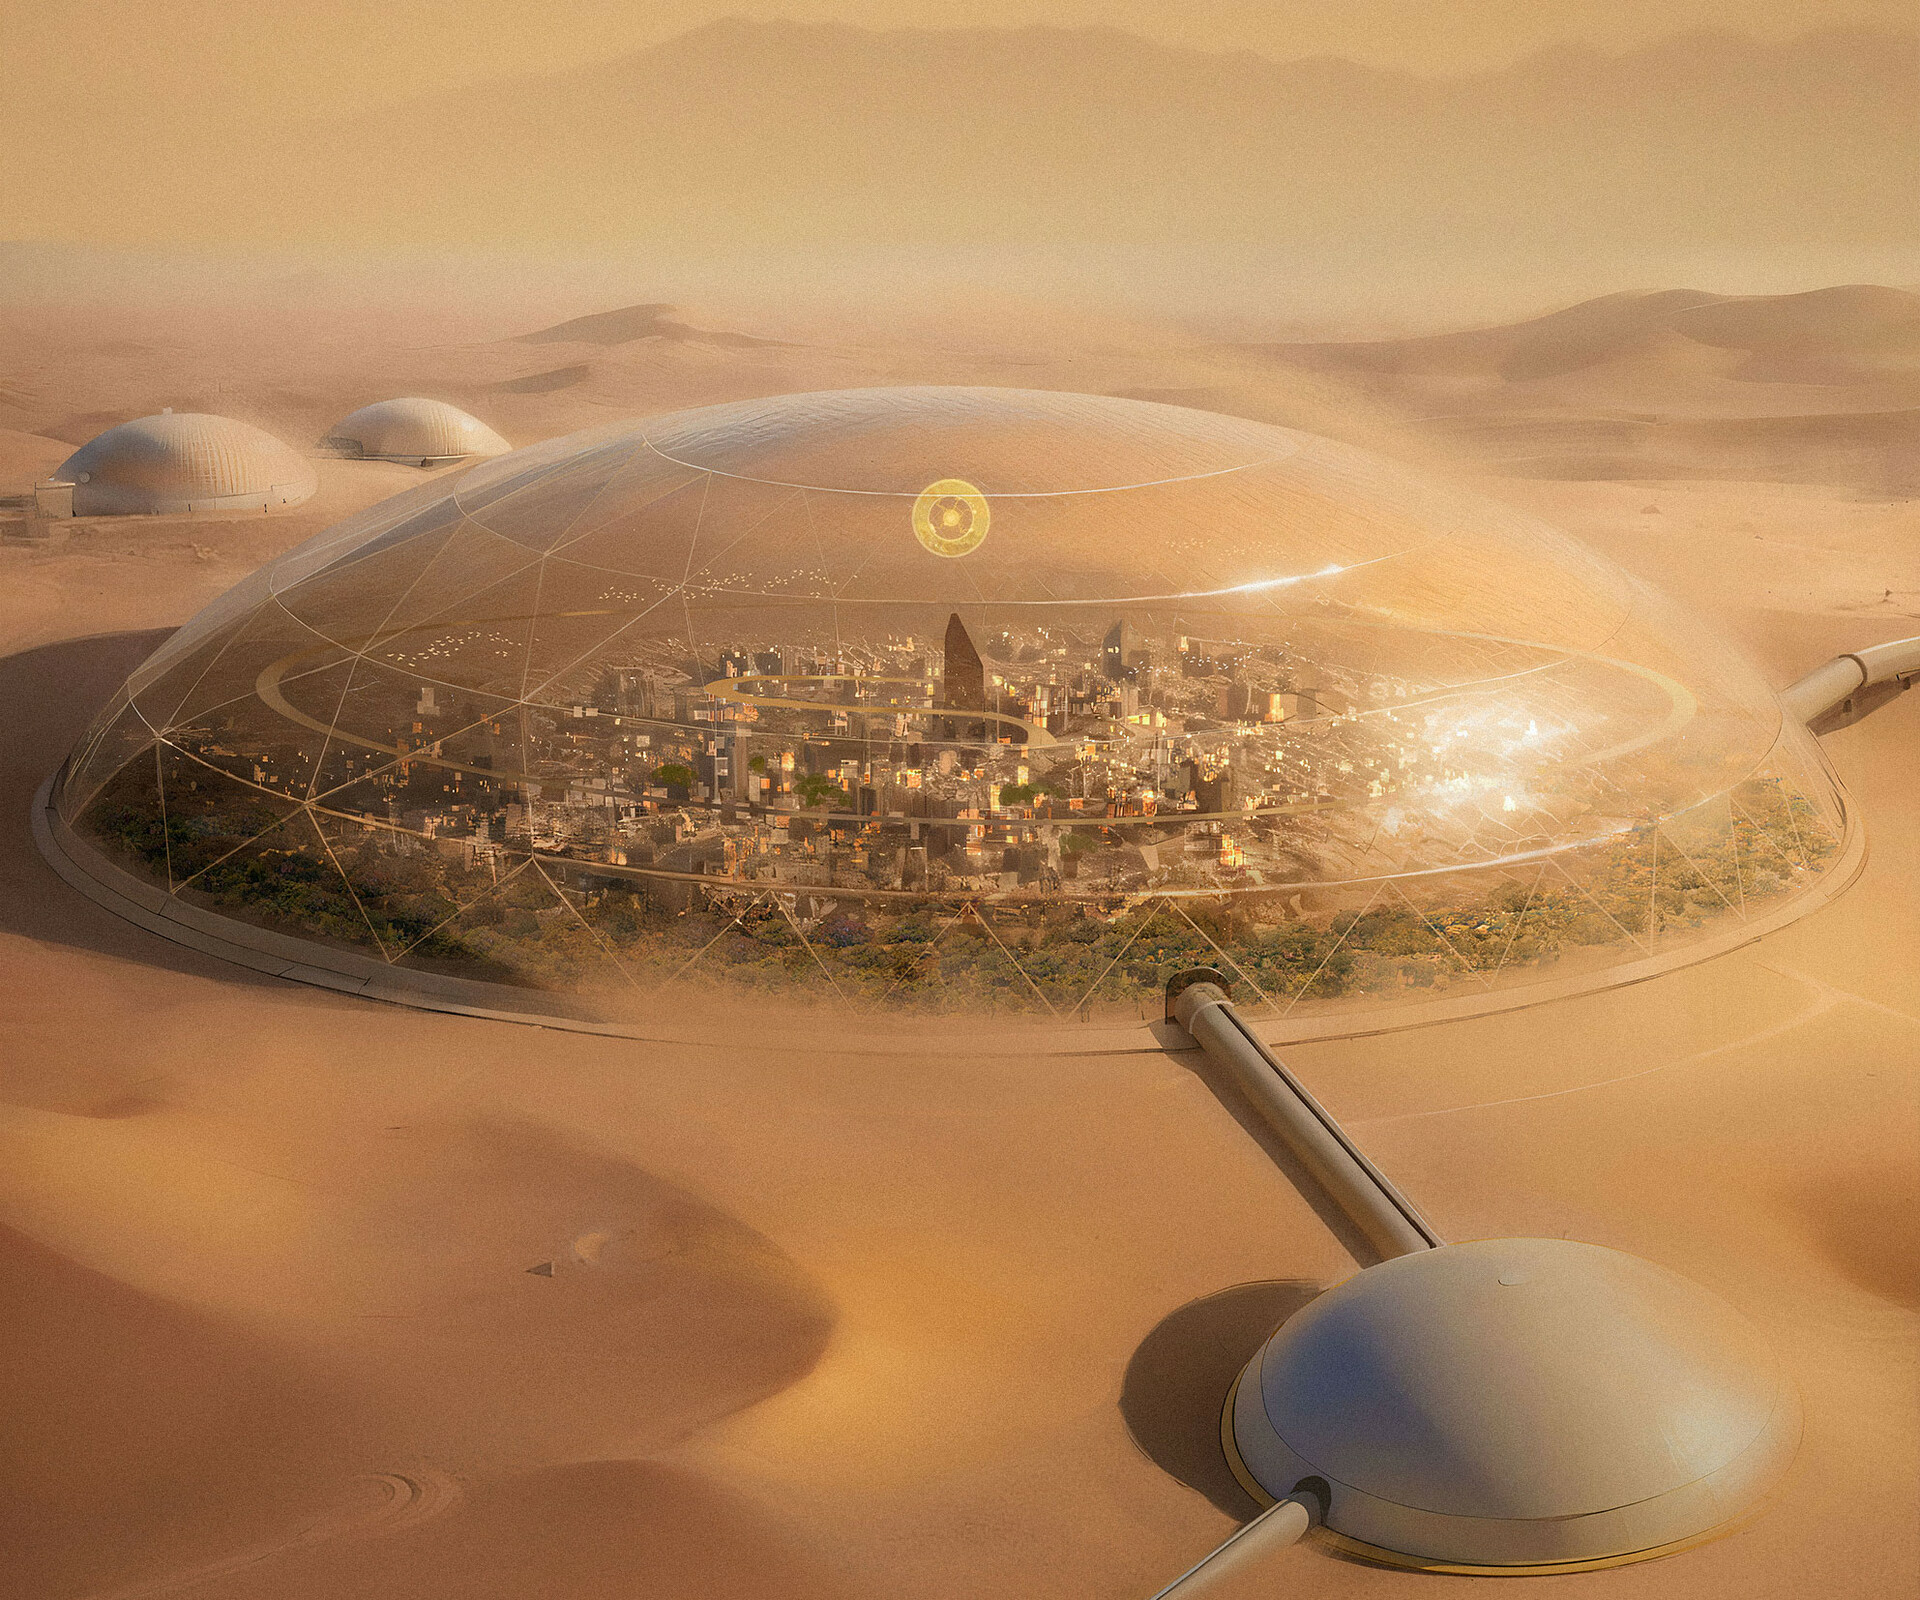 Desert Dome City by Mark Zhang